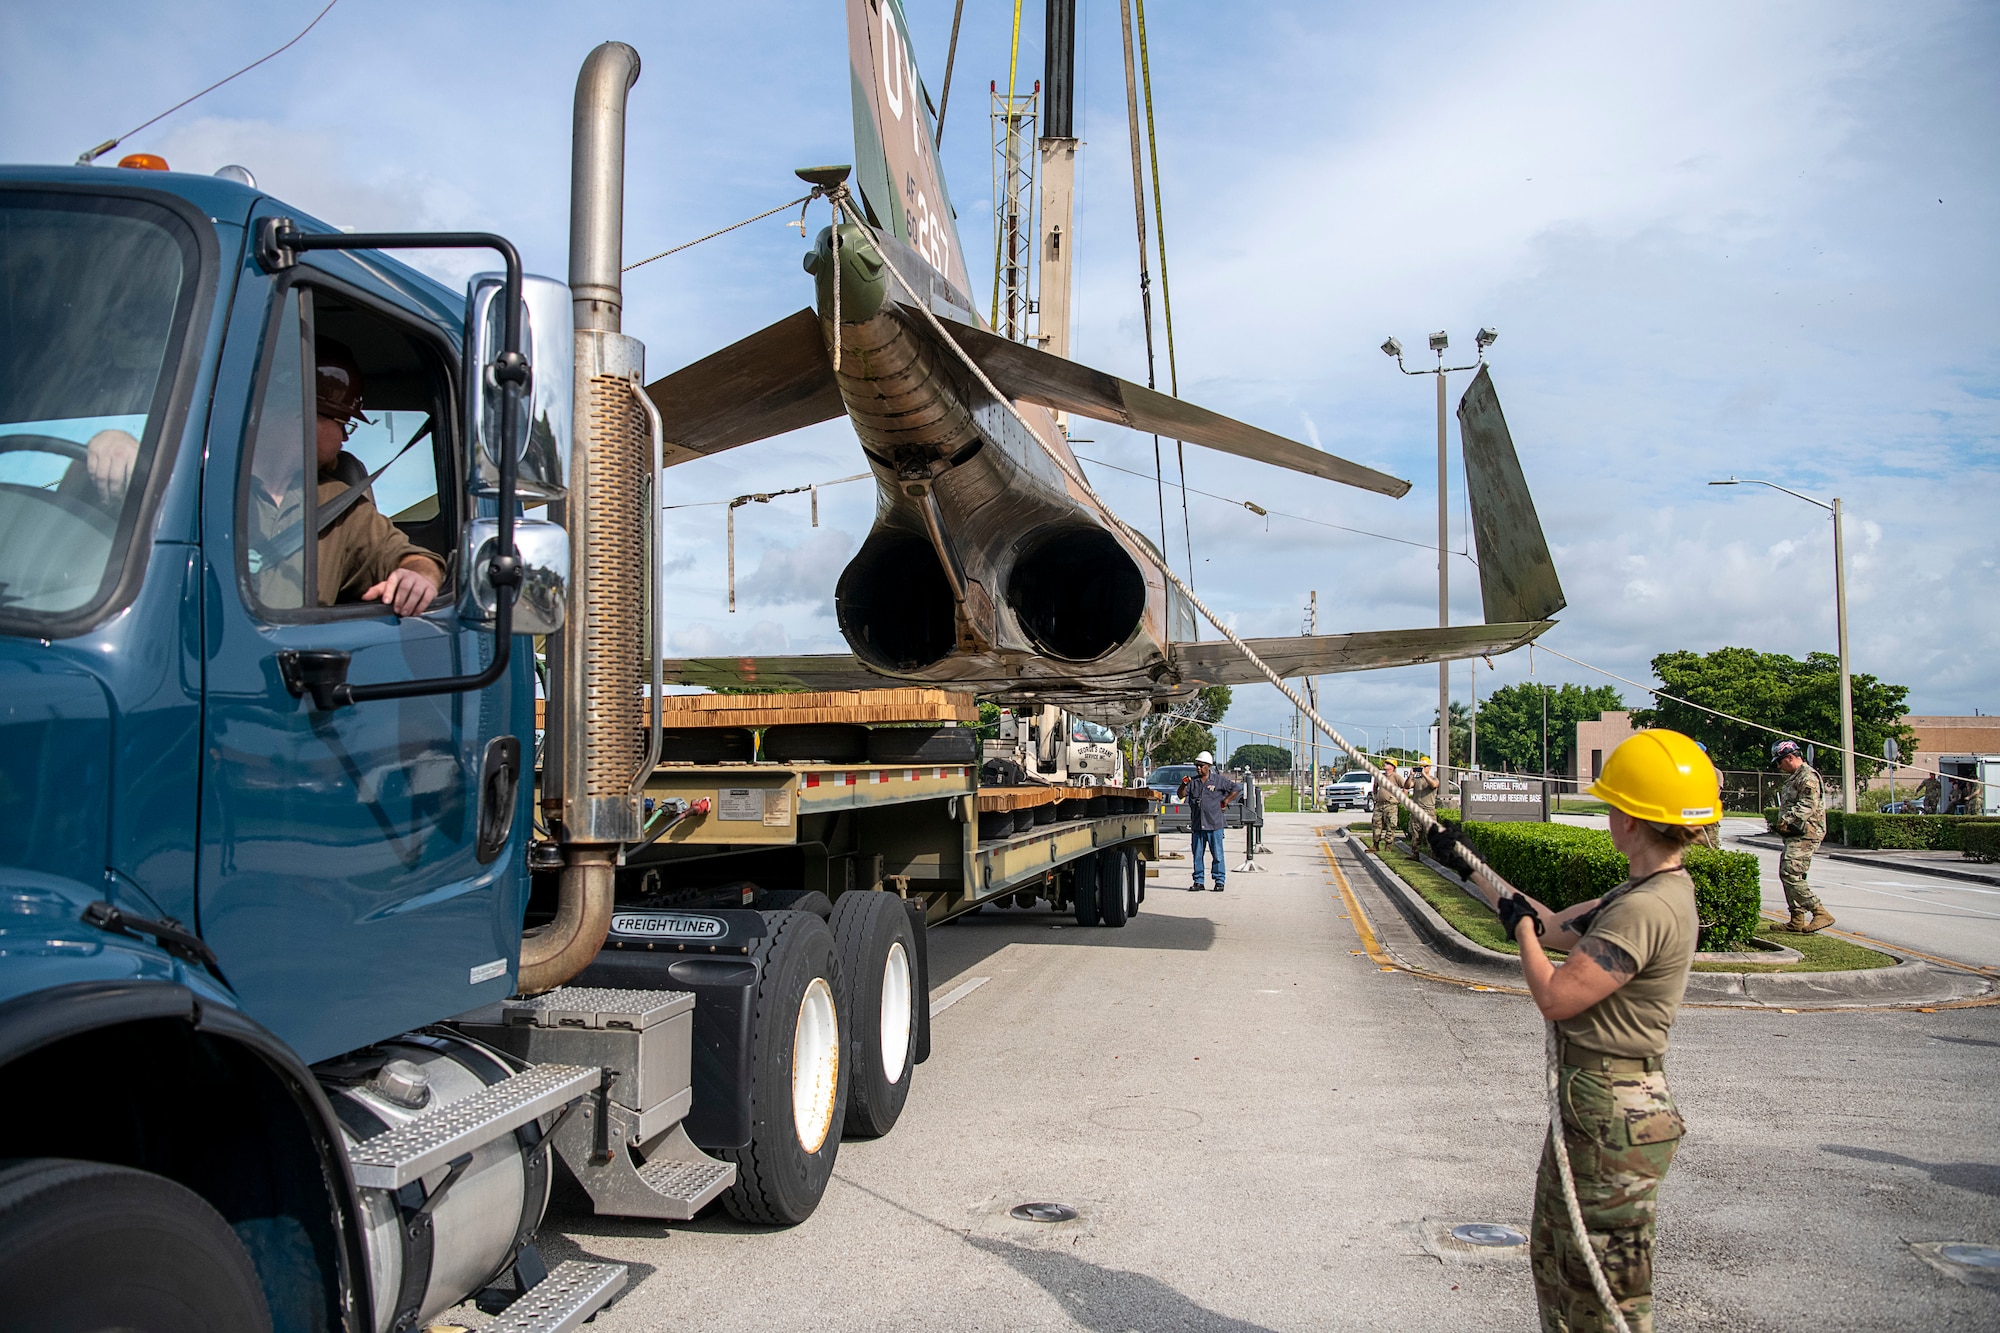 Personnel load F-4D fighter jet, serial number 66-0267, to a flatbed trailer prior to being transported to the aircraft corrosion control facility at Homestead Air Reserve Base, Fla., on Oct. 28, 2021 (U.S. Air Force photo by Tim Norton)